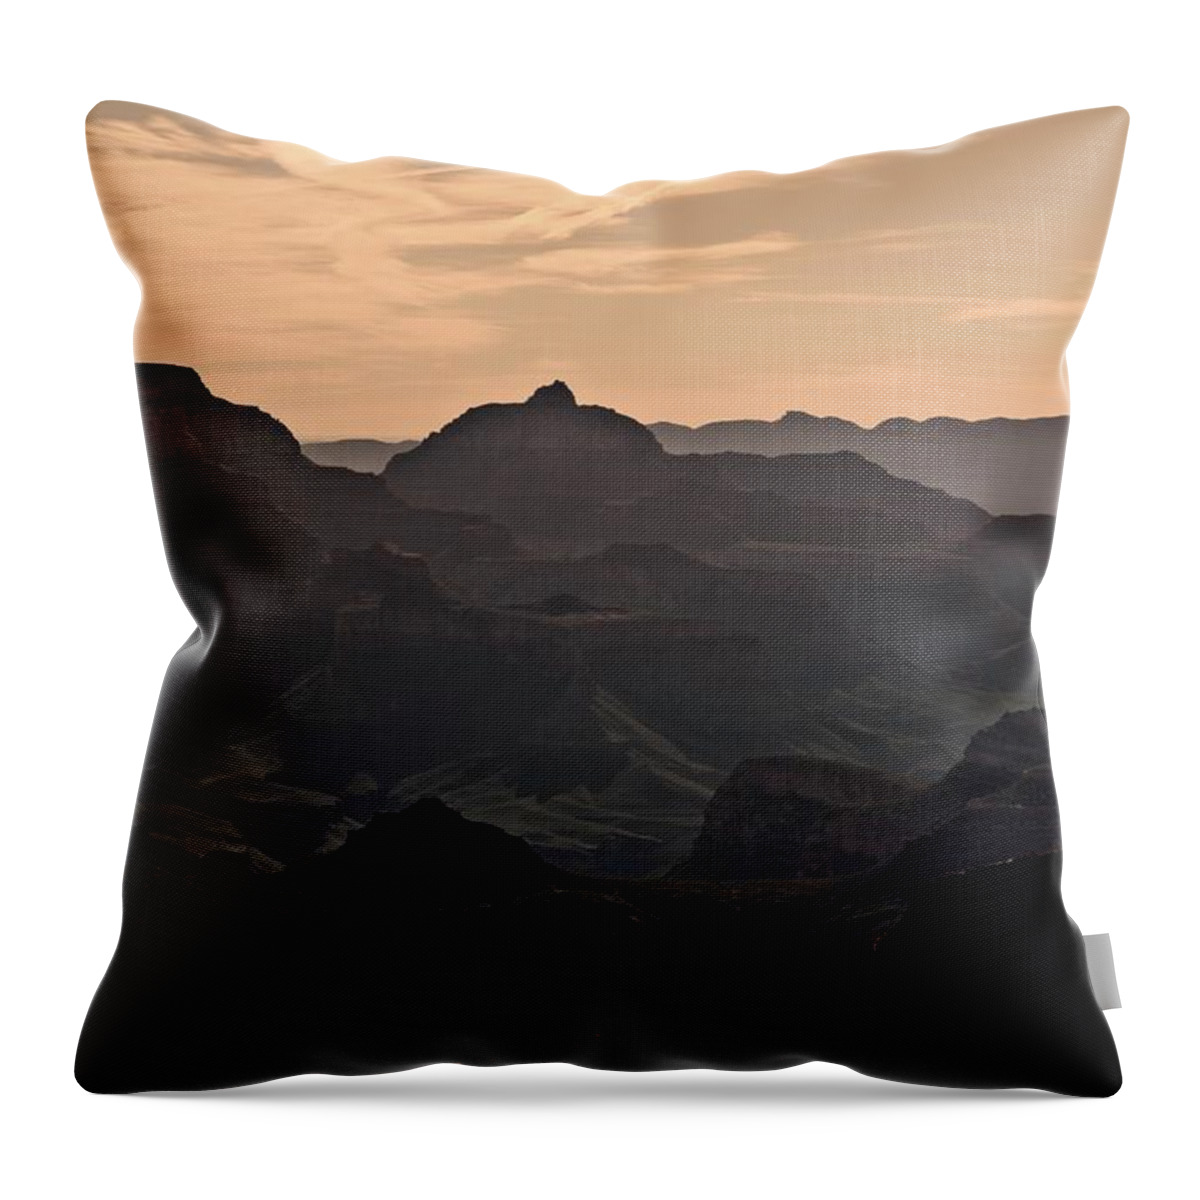 Grand Canyon Throw Pillow featuring the photograph Off The Grid - The Grand Canyon And Beyond by Hany J